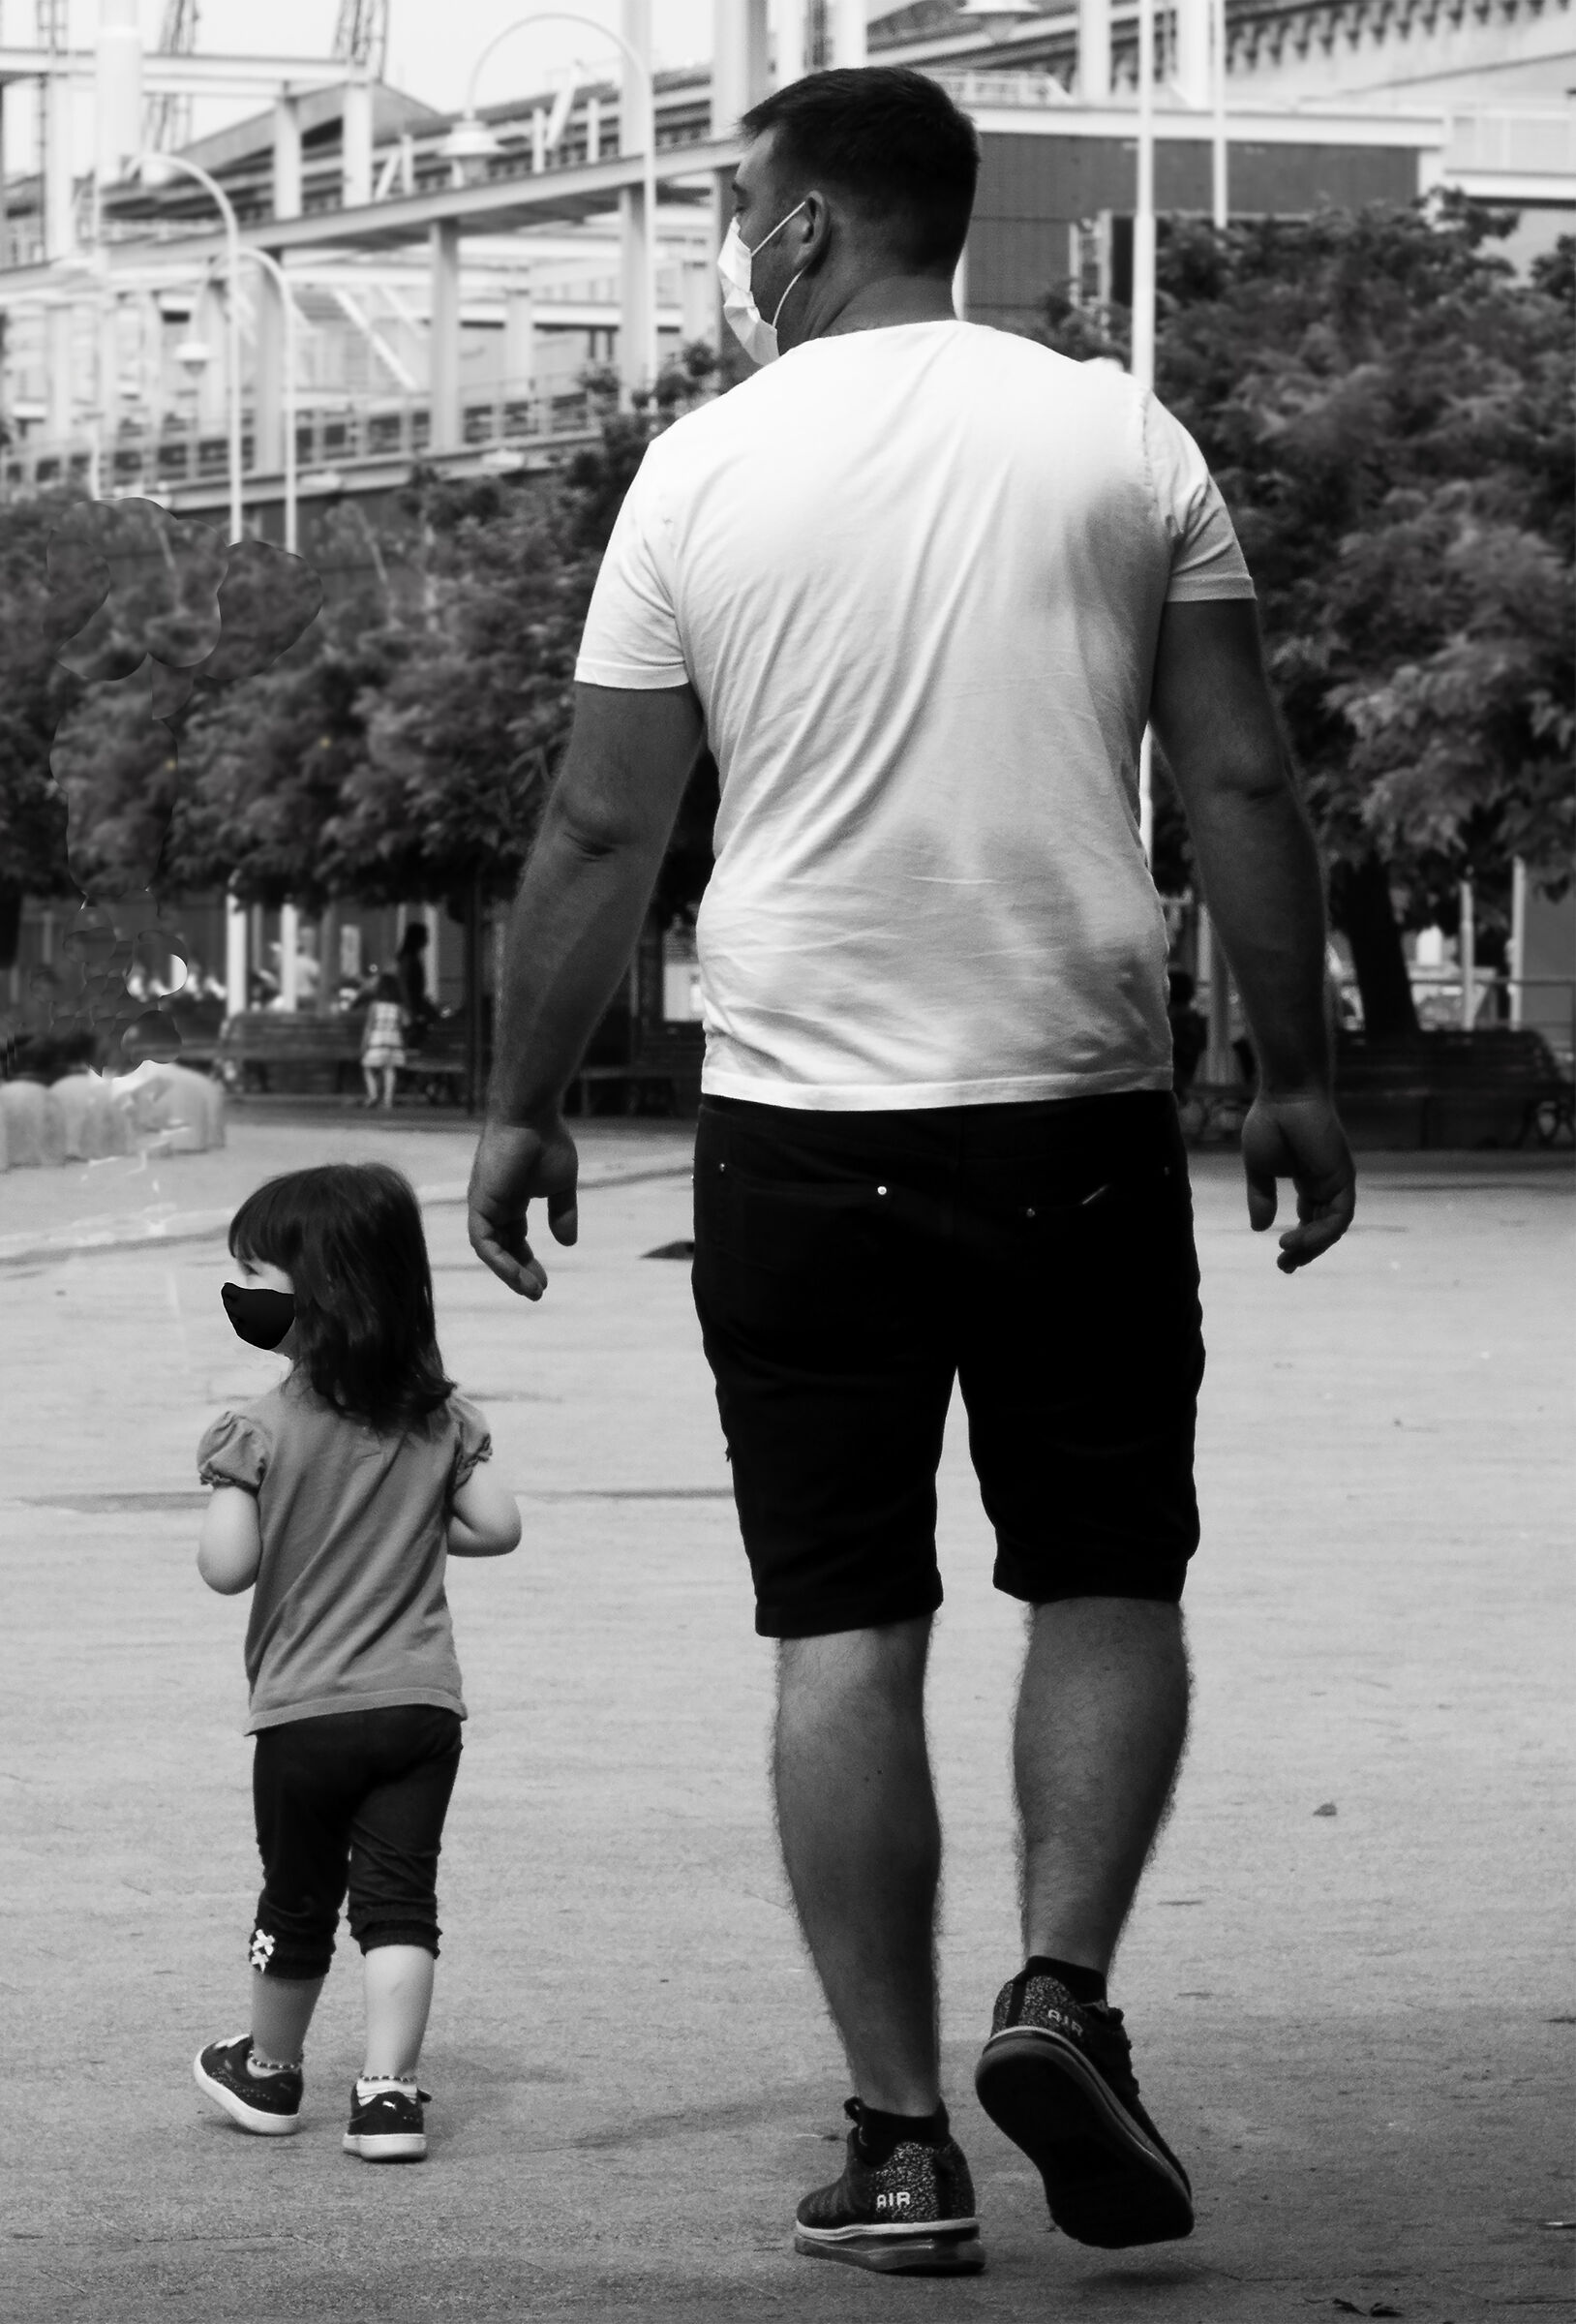 The Giant and the Little Girl...